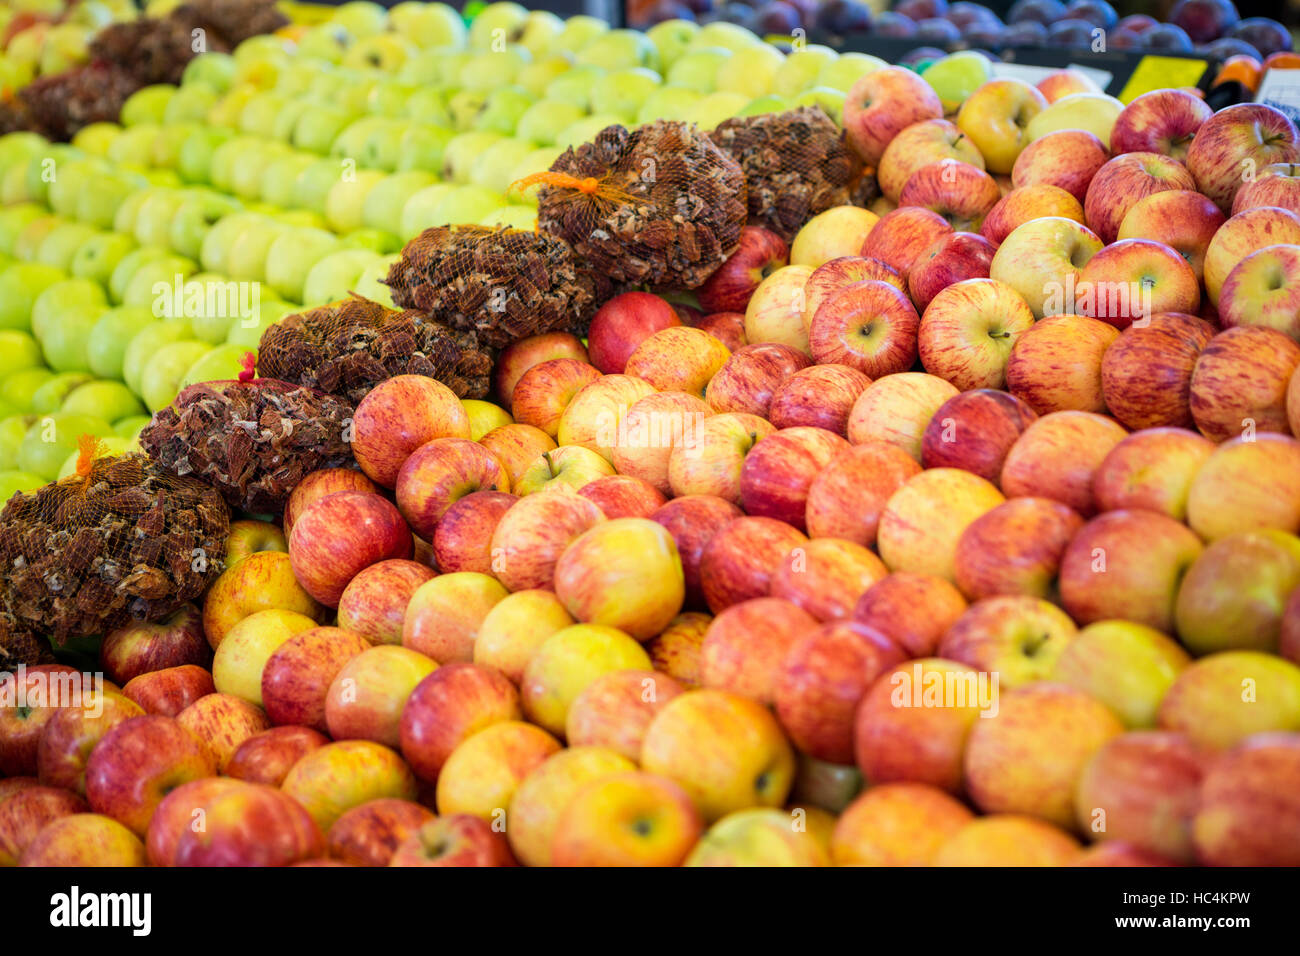 Variety of fruits in organic section Stock Photo